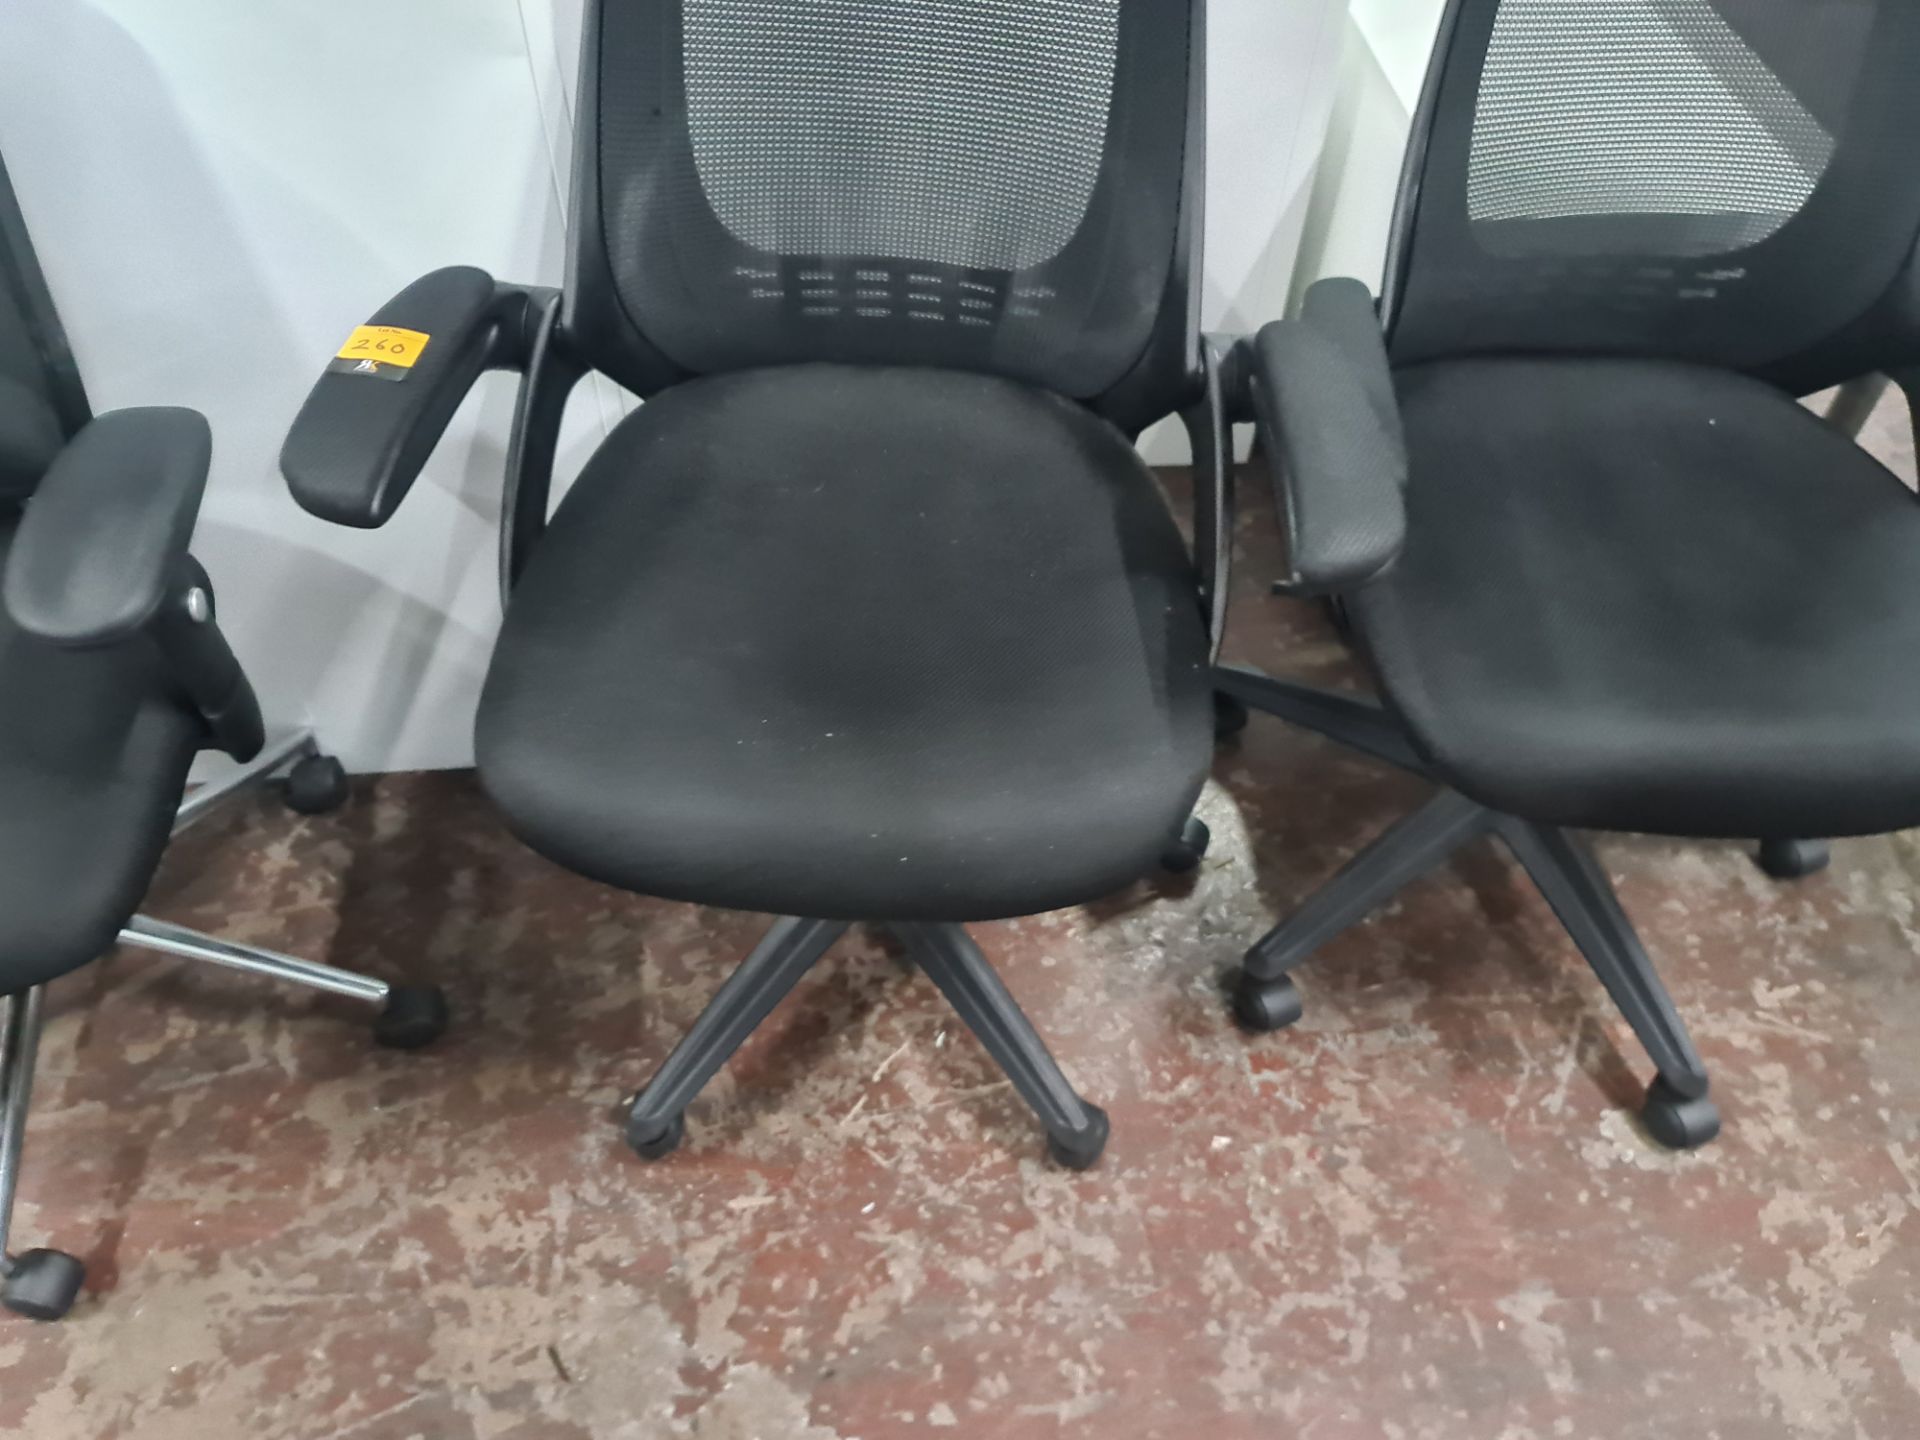 Pair of matching modern high mesh back operator chairs - Image 2 of 6